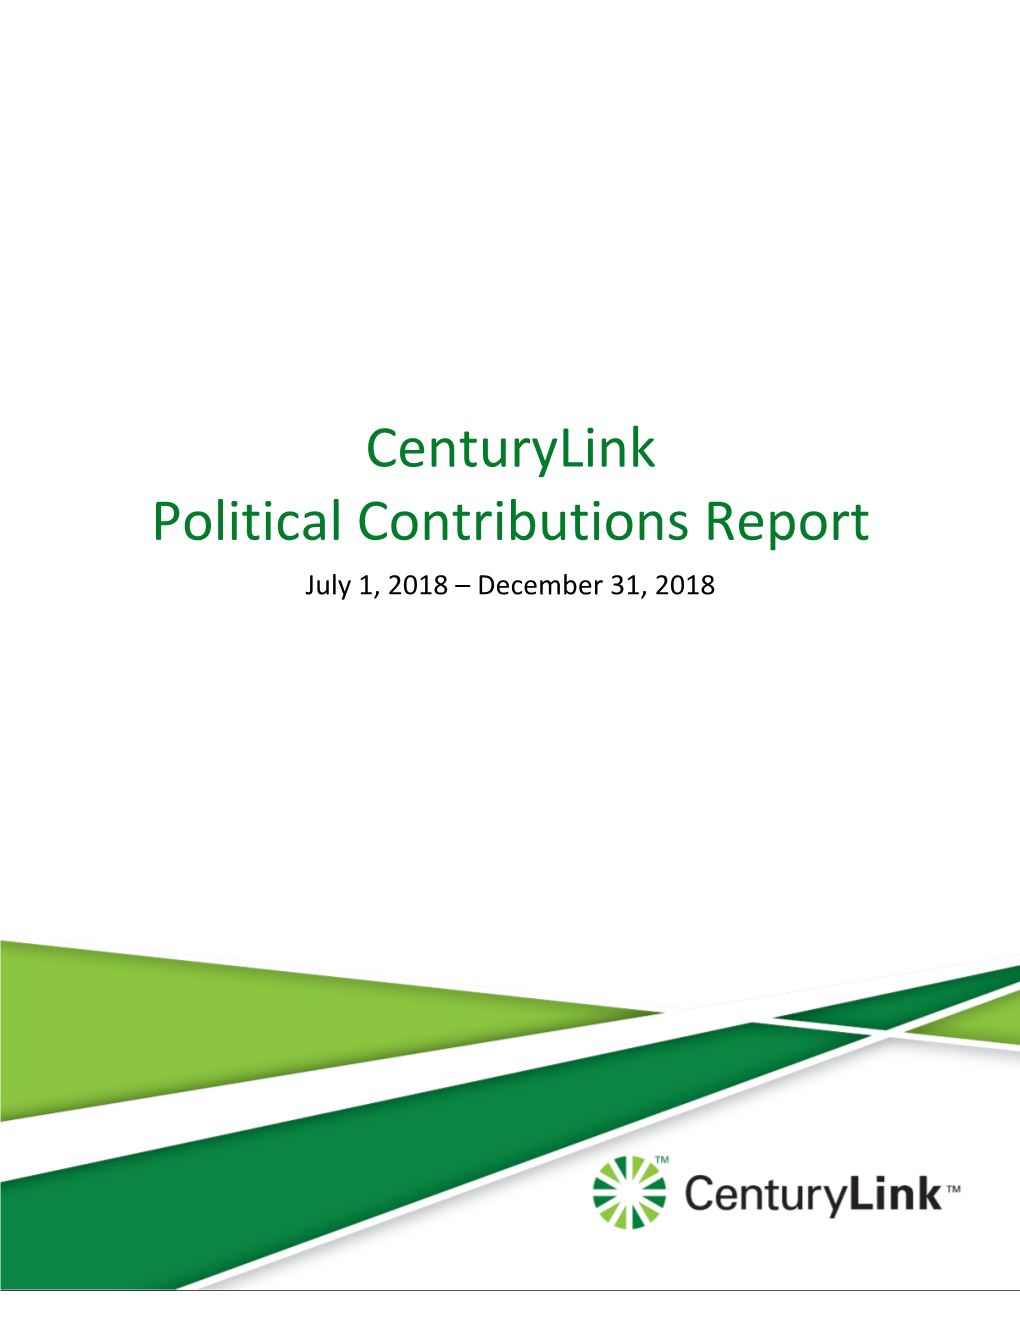 Corporate Political Contribution and Employee PAC Contribution Reports